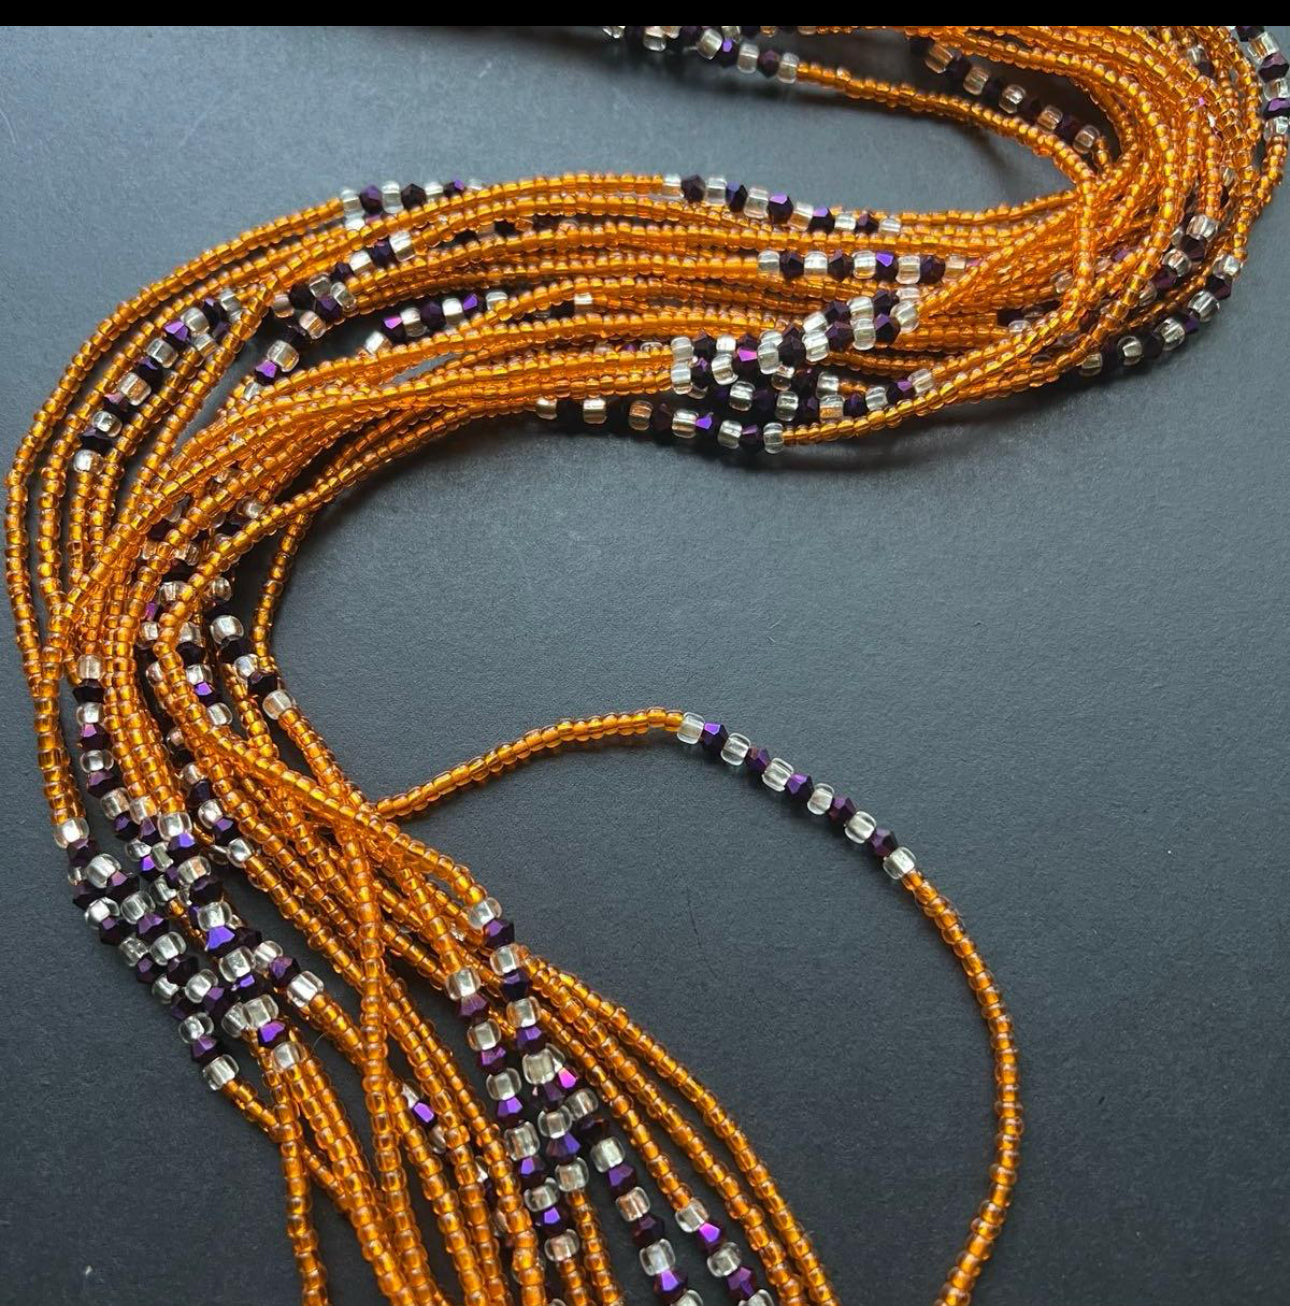 Ghanaian Heritage Unveiled. Single Strand Orange Waist Beads Collection 43 Inches (Wholesale)